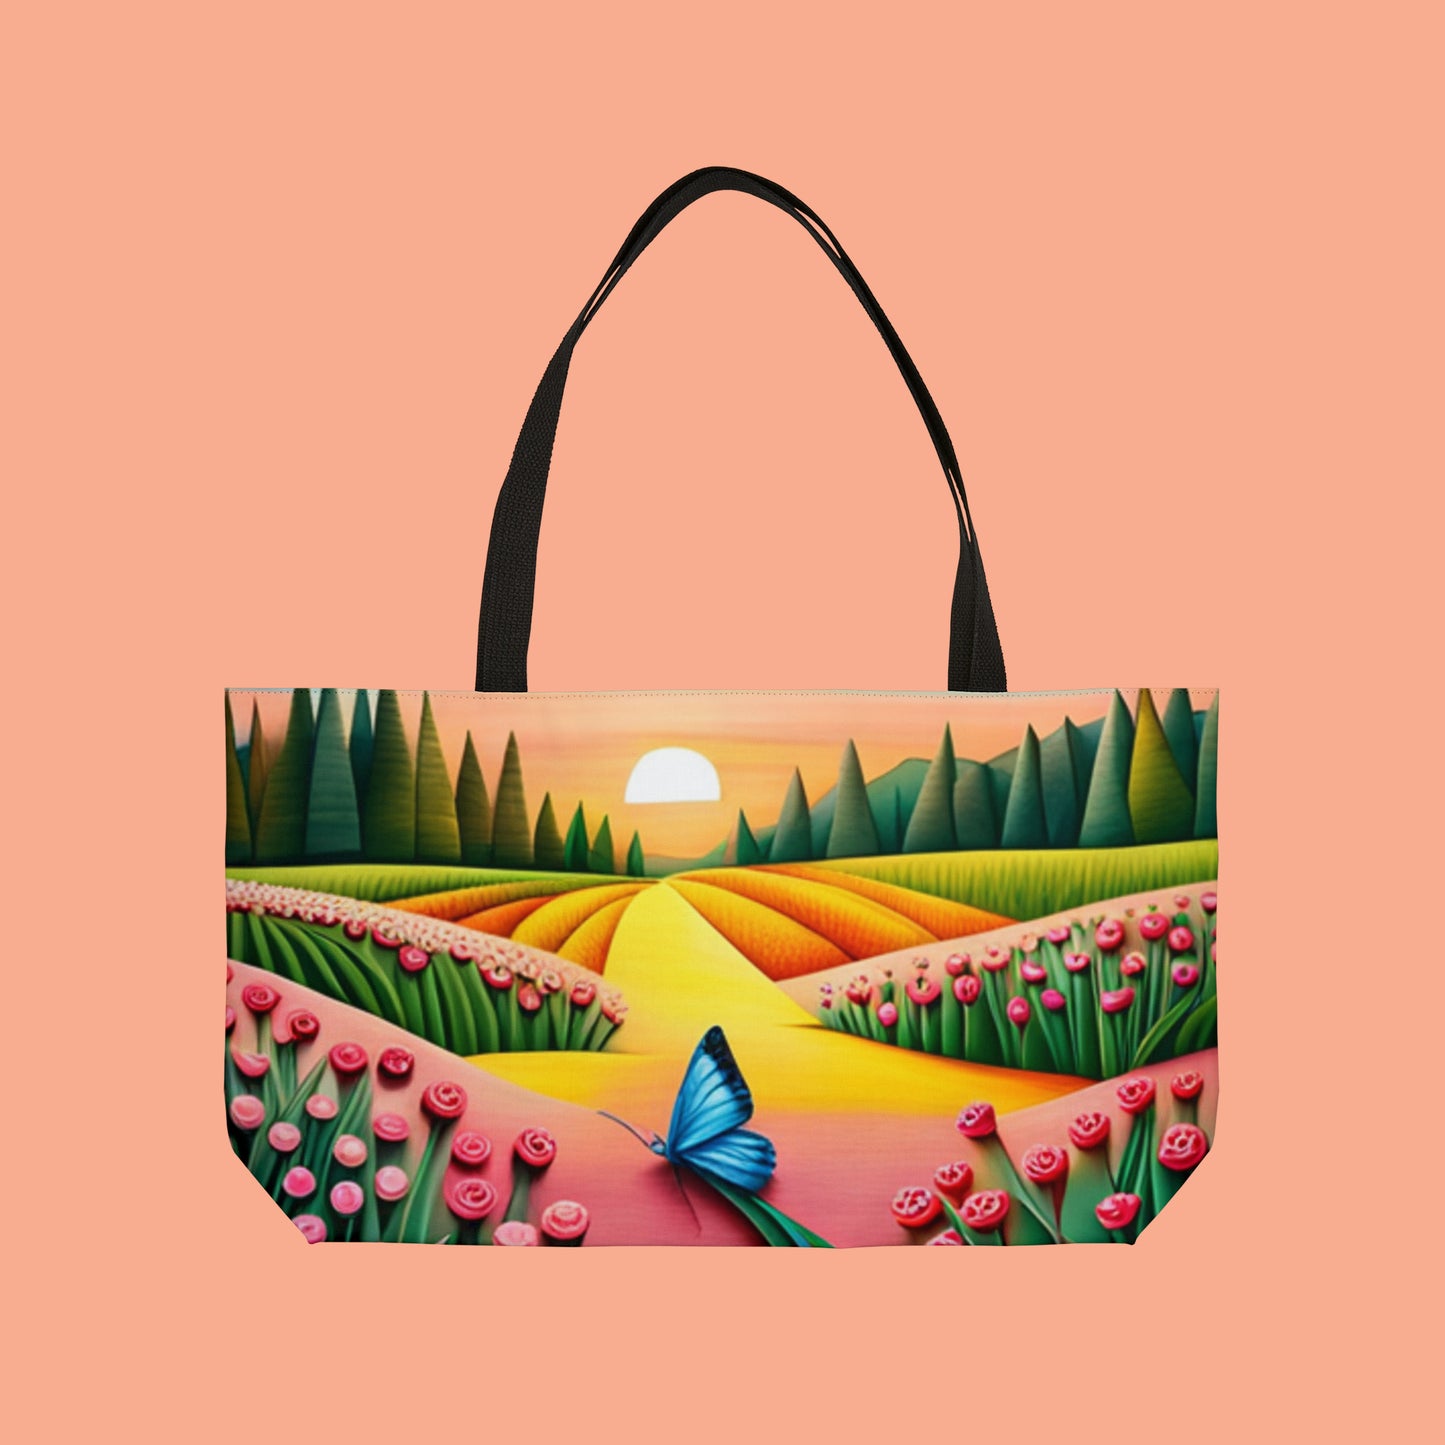 Blue butterfly in the middle of a field of flowers inspired this origami style design Weekender Tote Bag.